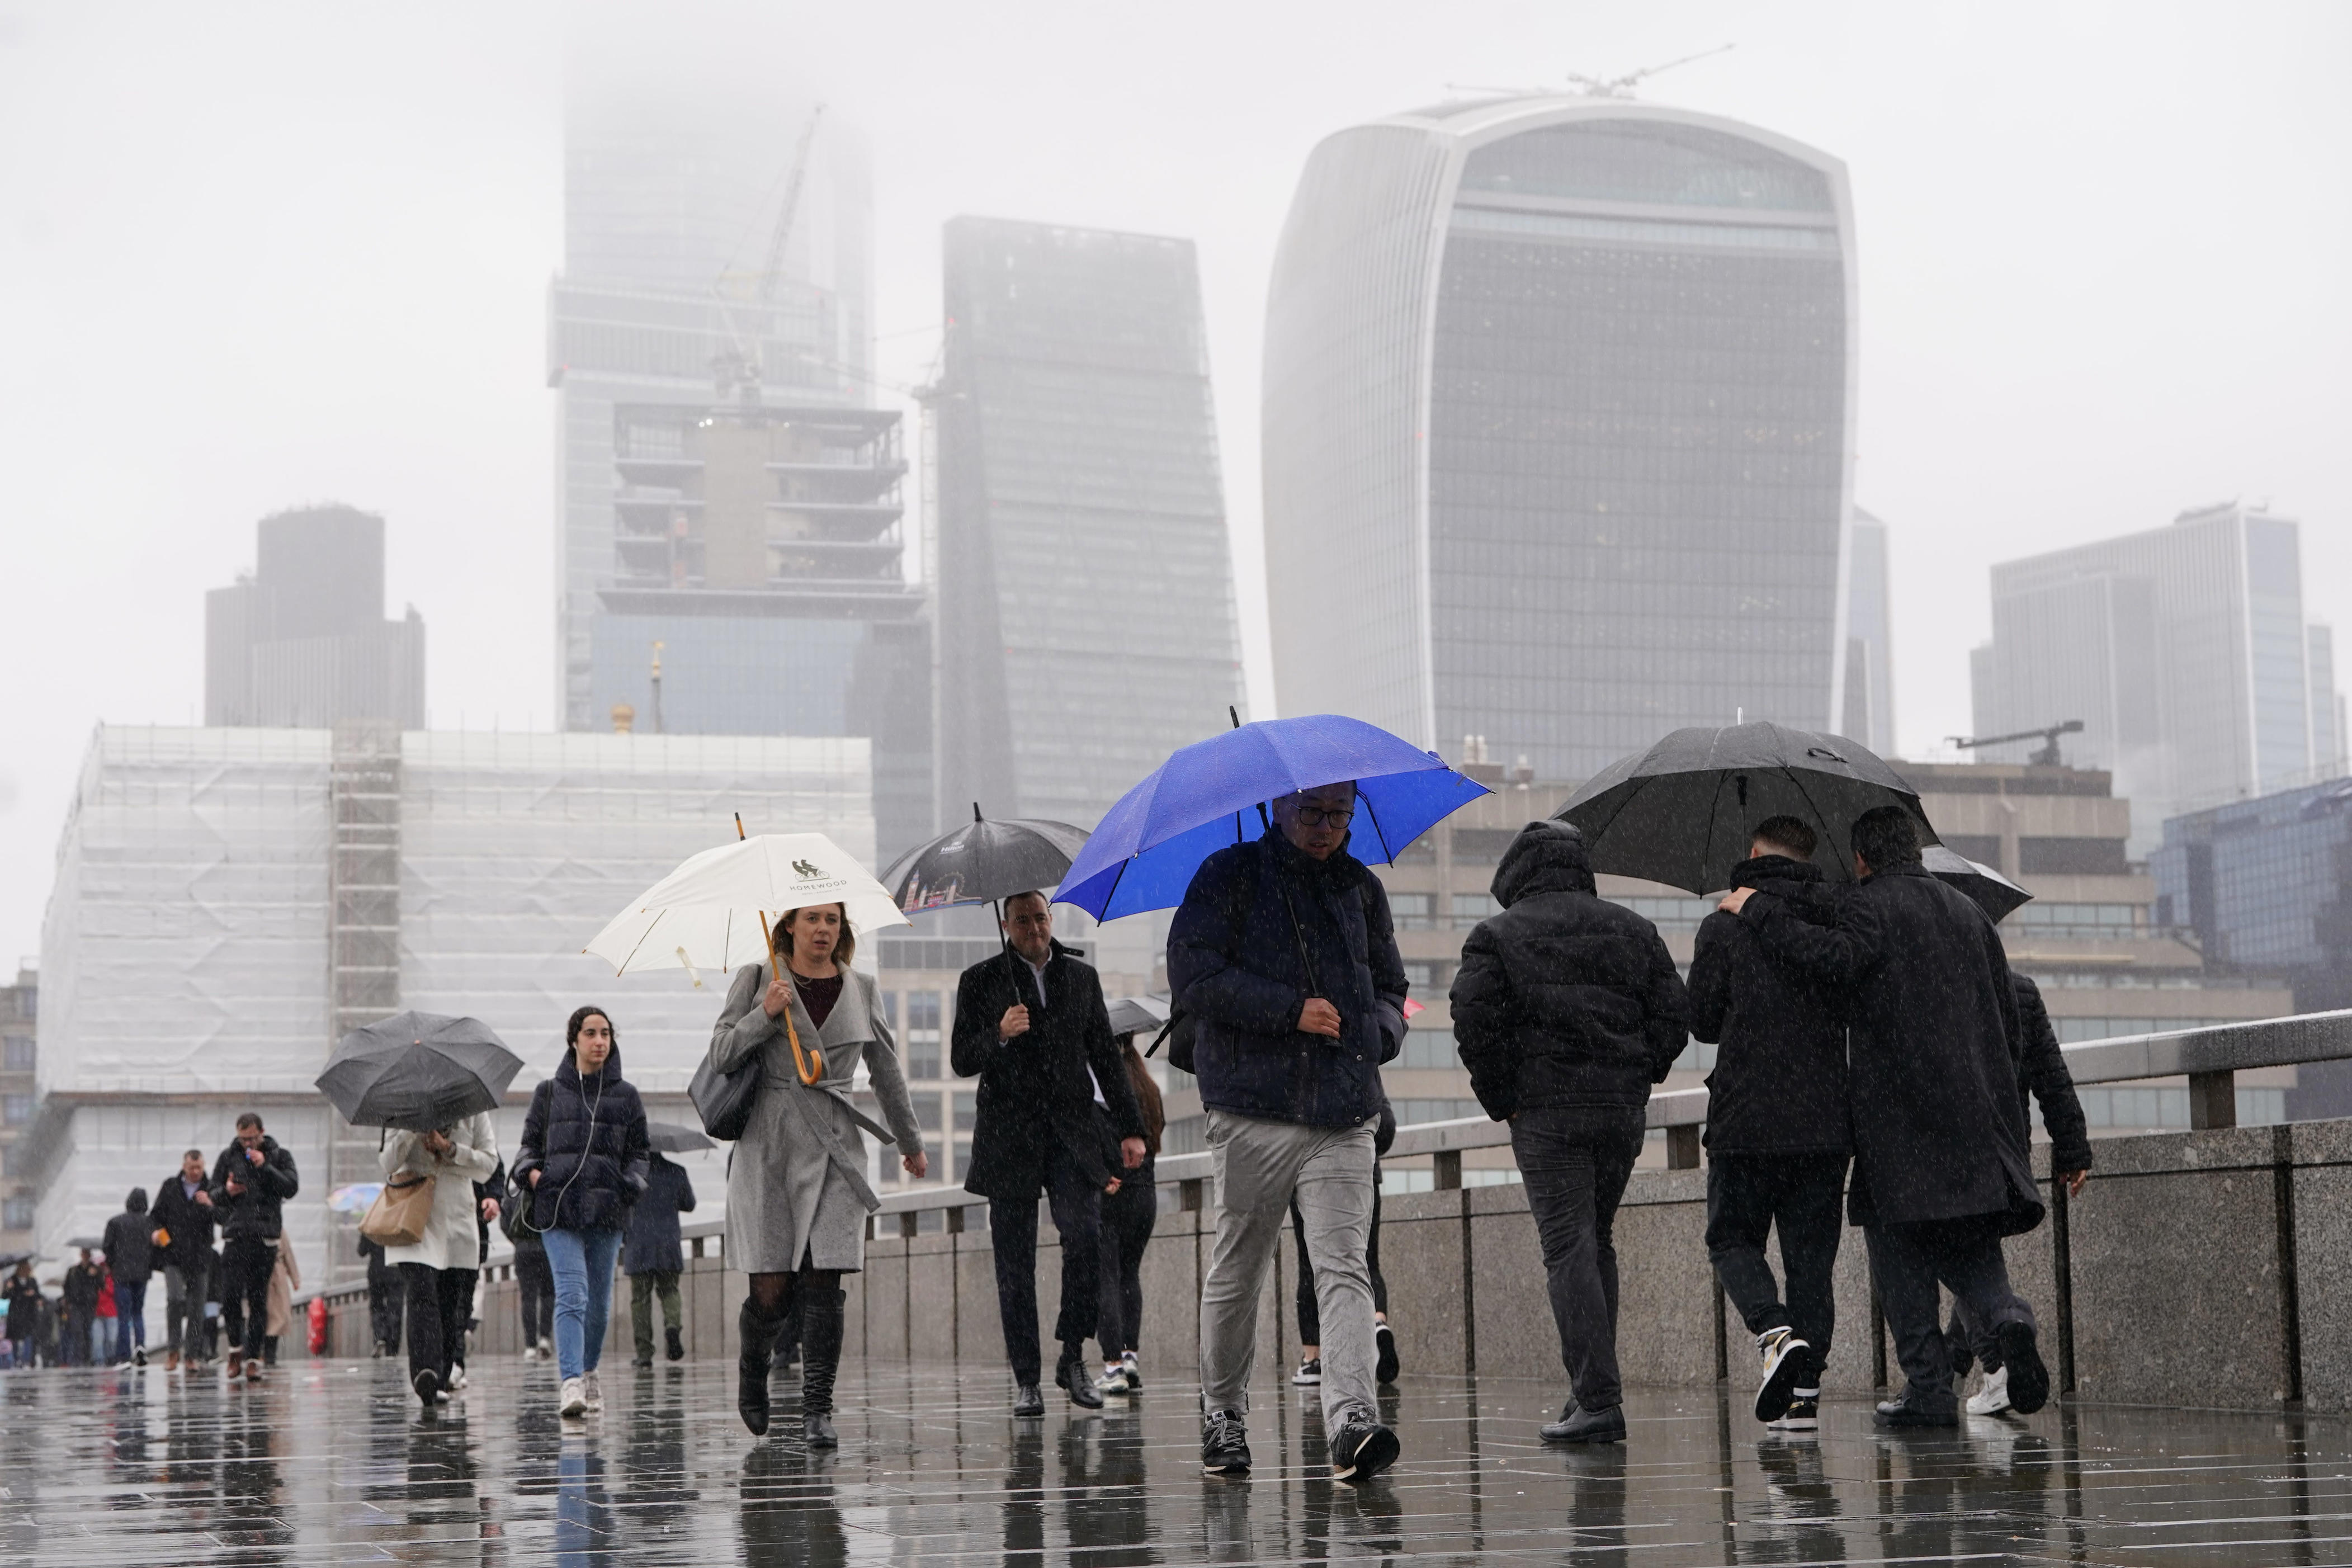 london weather: met office predicts may bank holiday washout with over 12 hours of showers